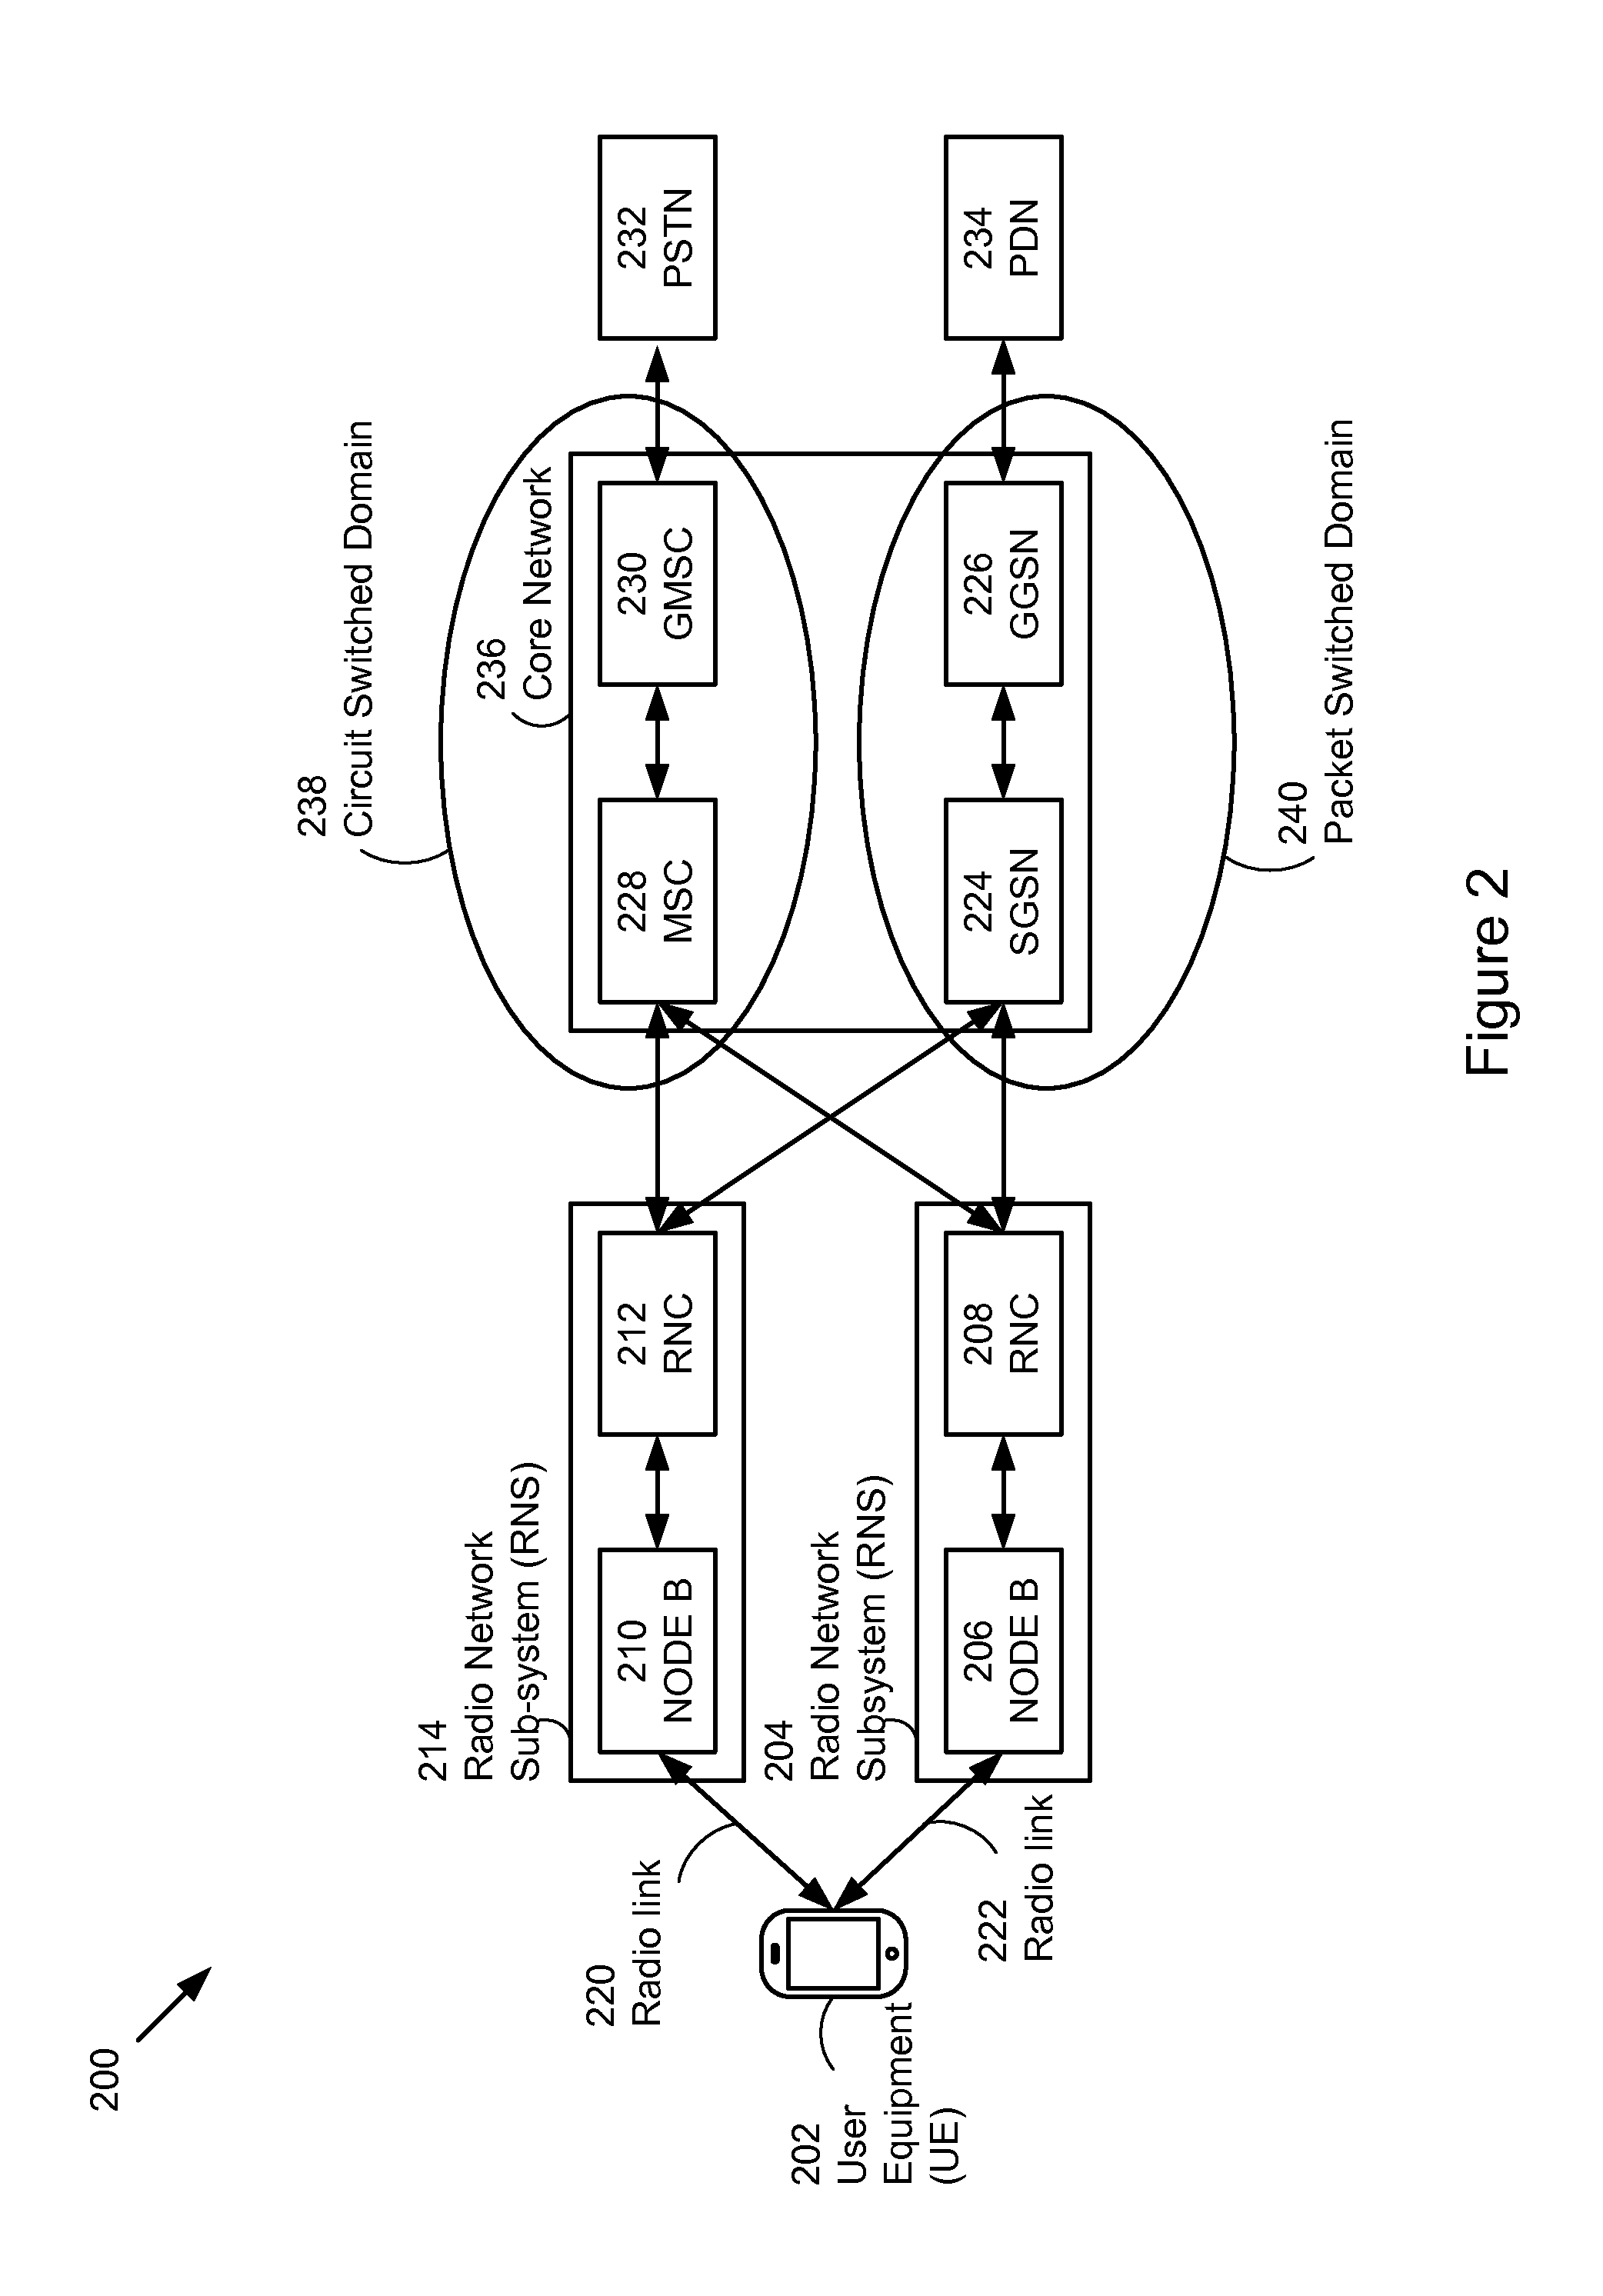 Method to control reconfiguration of multiple radio access bearers in a wireless device